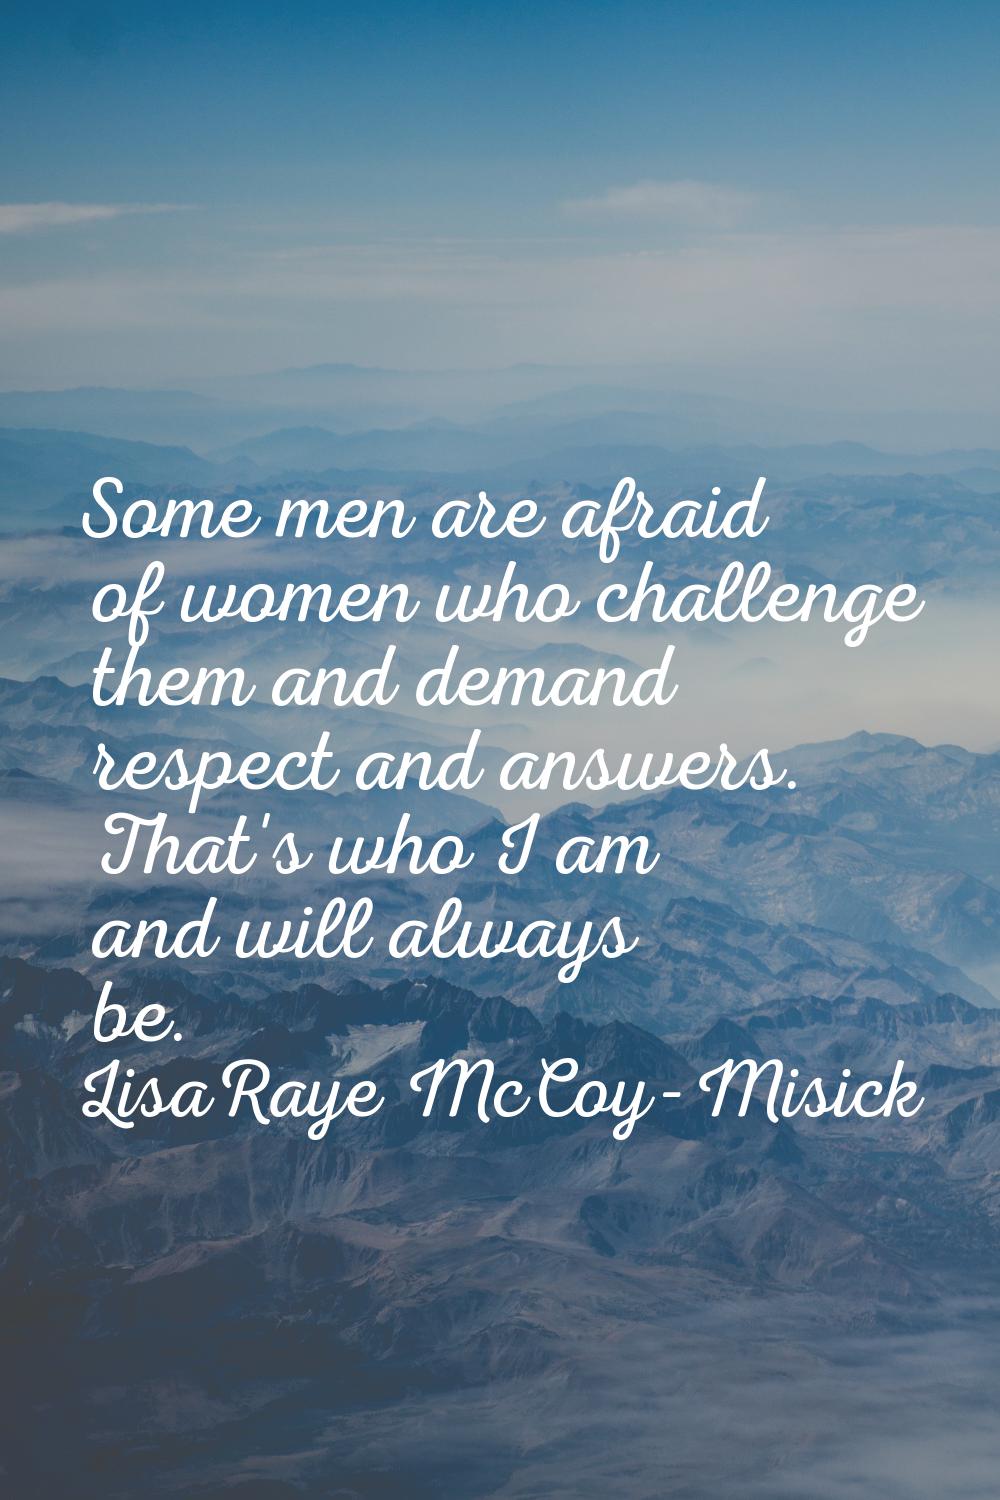 Some men are afraid of women who challenge them and demand respect and answers. That's who I am and